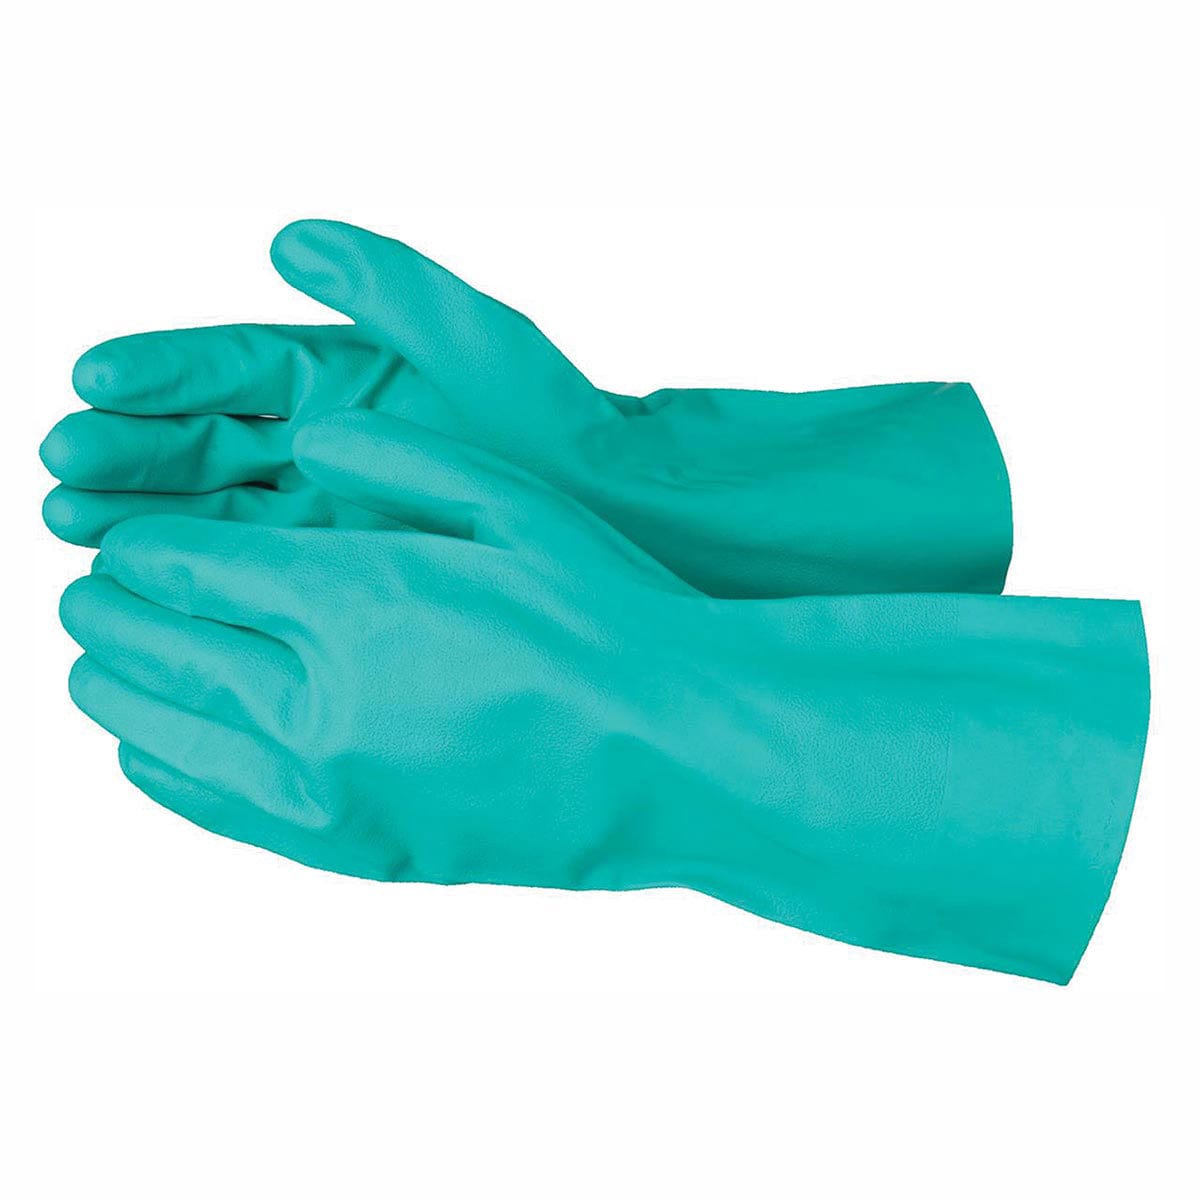 Gemplers 15-mil Unlined Chemical-Resistant Nitrile Gloves, Bucket of 48 Pair